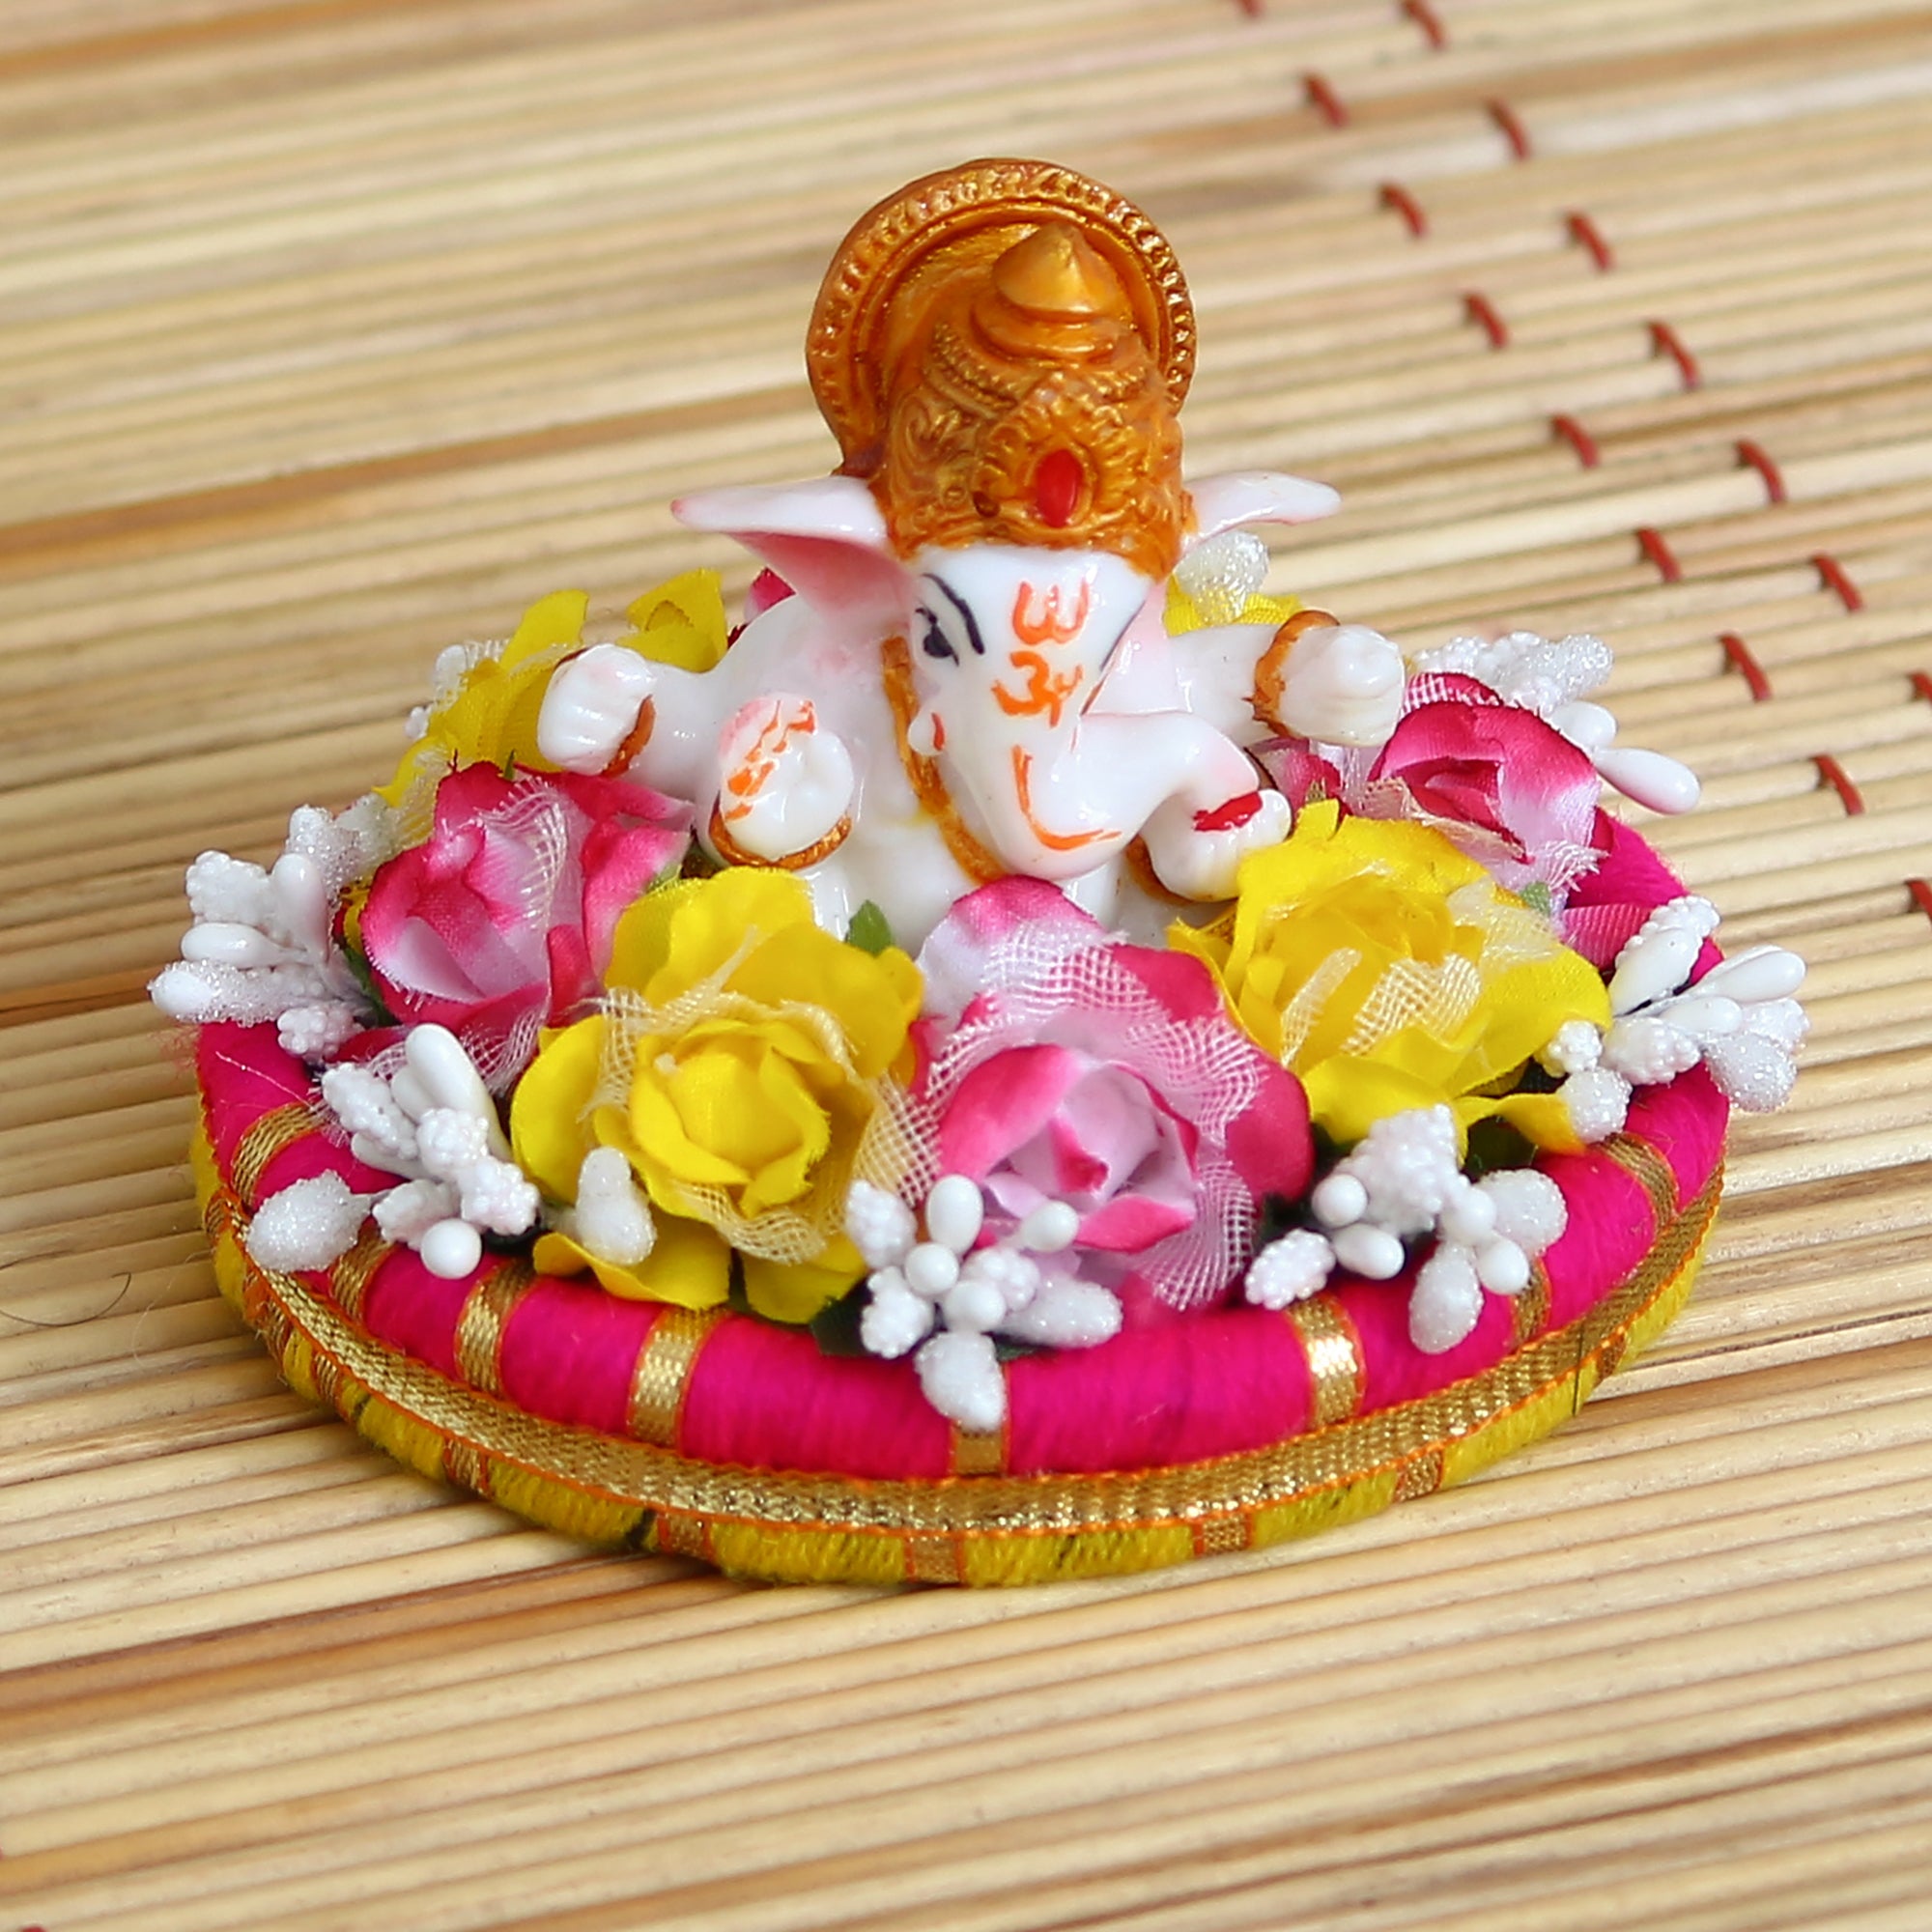 Lord Ganesha Idol On Decorative Handcrafted Colorful Flowers Plate 2